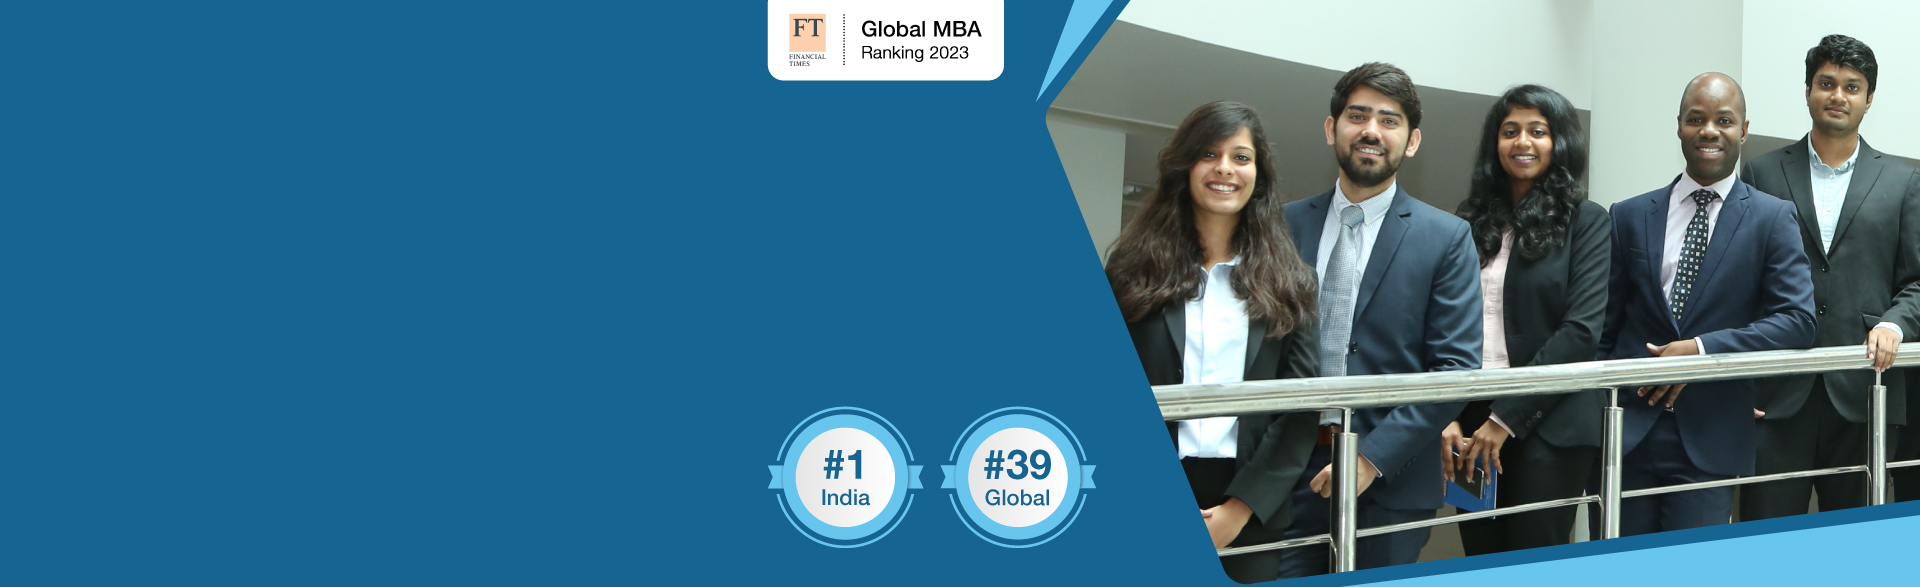 We are the #1 Indian B-school in the FT Global MBA Ranking 2023. Also #1 for research in India.